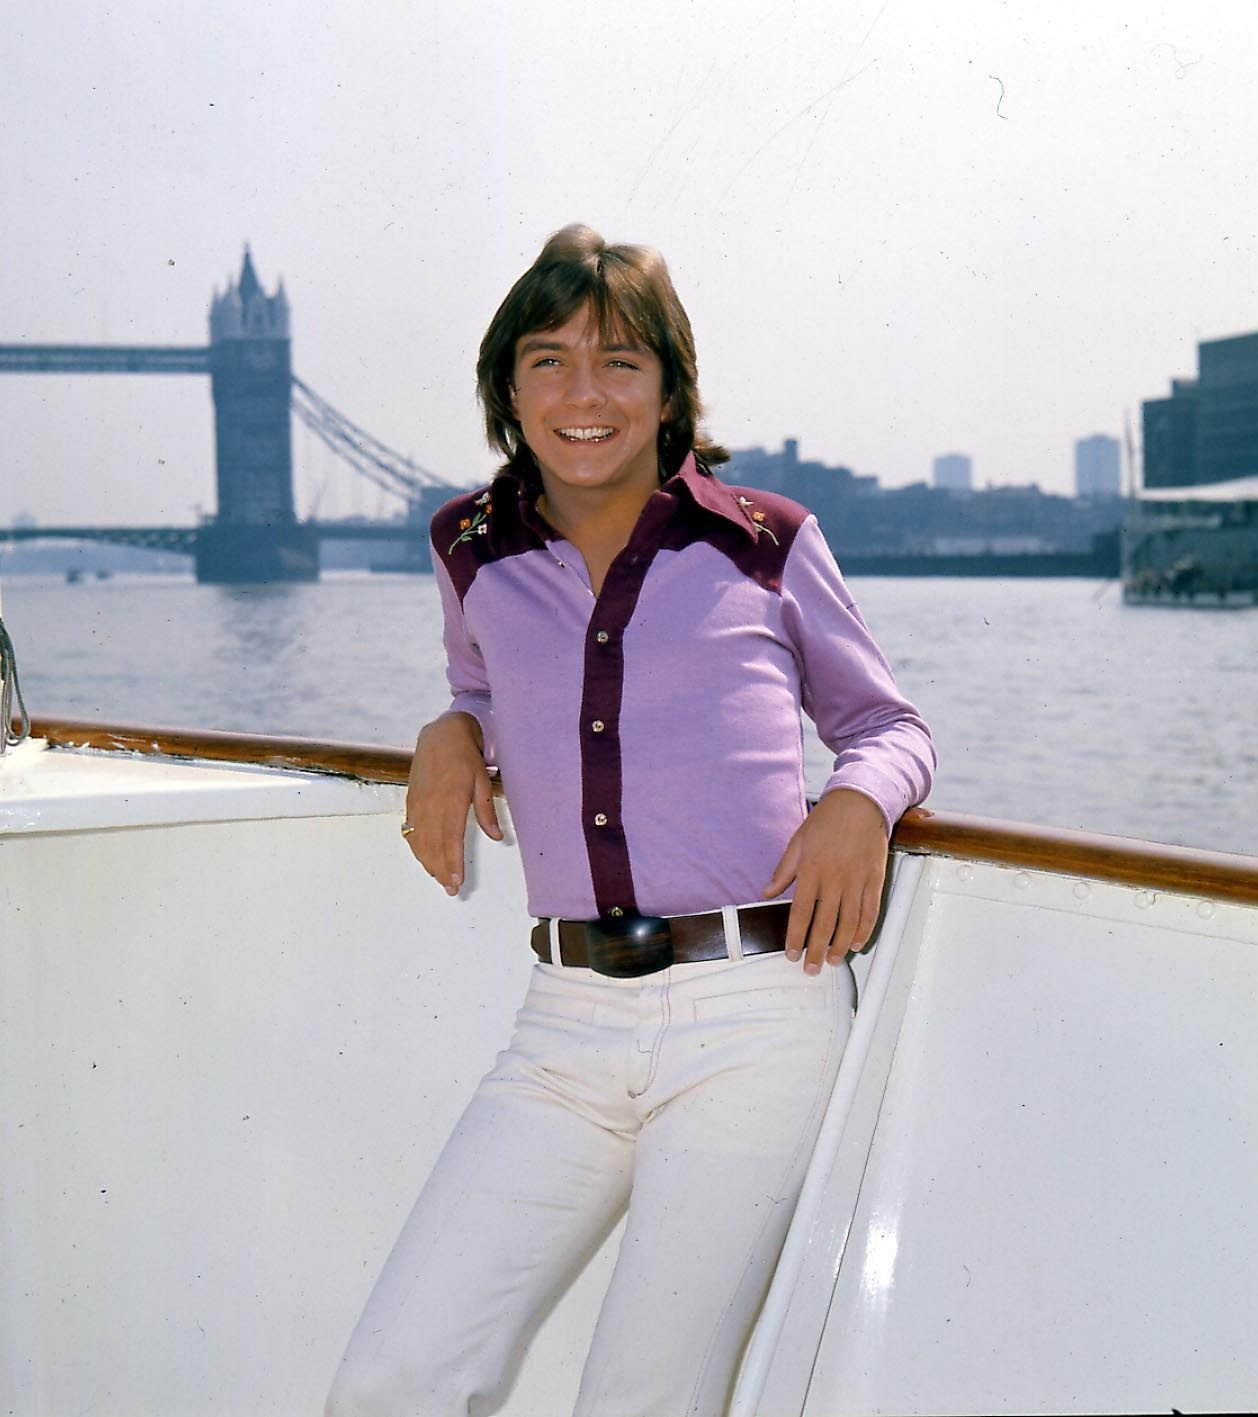 David Cassidy smiling while posing for a photo on September 9.1972. | Source: Avalon/Getty Images